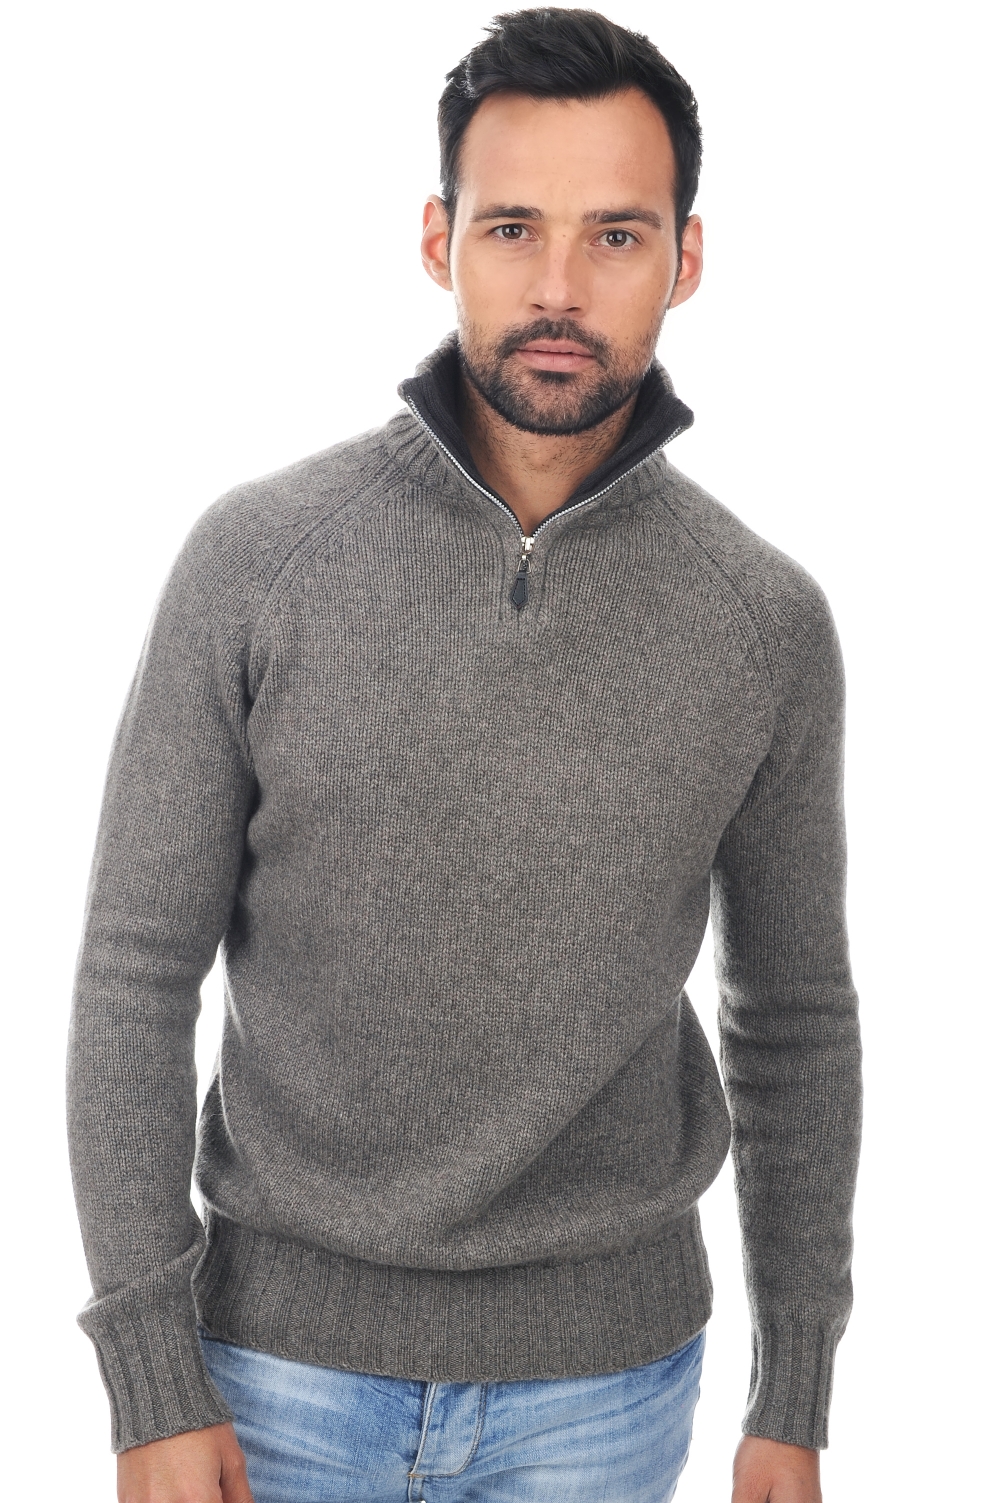 Cashmere men polo style sweaters olivier dove chine matt charcoal xs